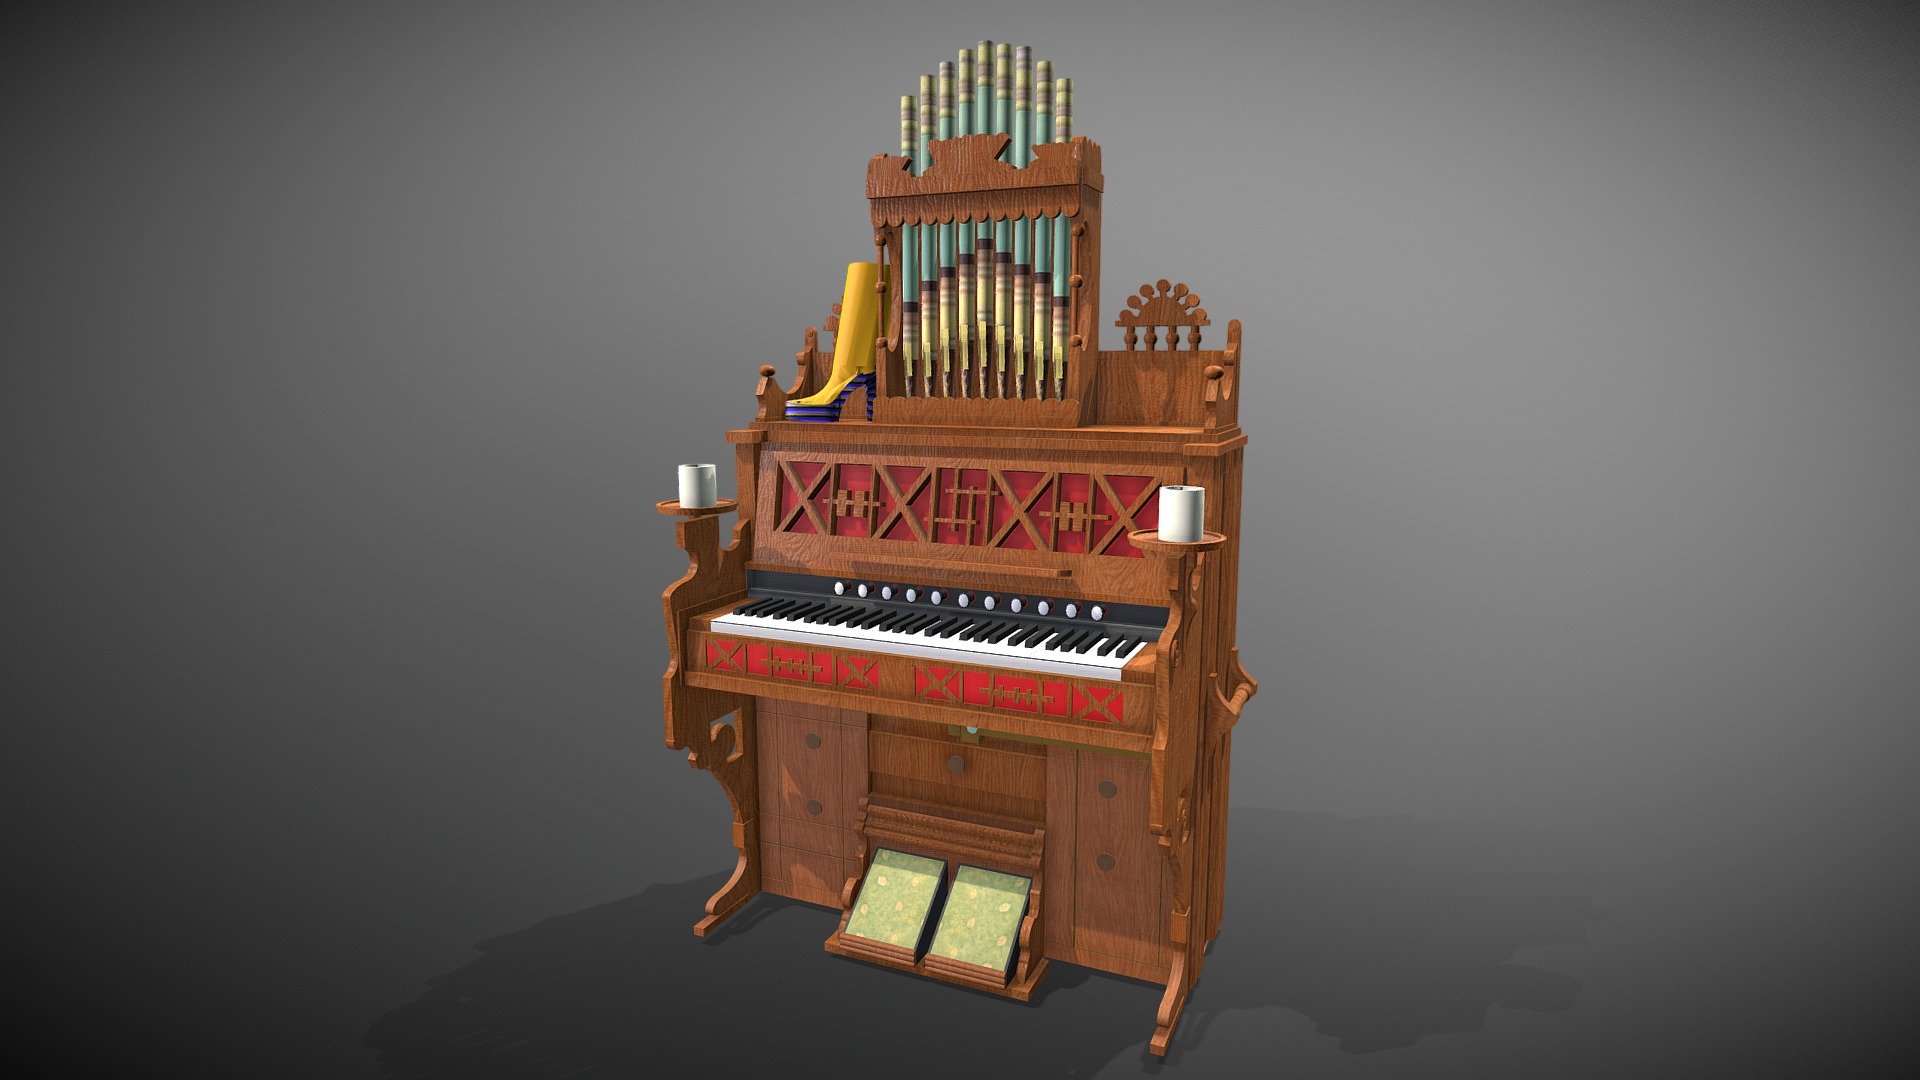 Neil Young's old pump organ made by Estey in 1985. 

Read more: https://www.rusted-moon.com/2017/02/neil-youngs-pump-orgel.html - 1885 Estey Pump Organ - 3D model by Rusted Moon (@rusted-moon.com) 3d model